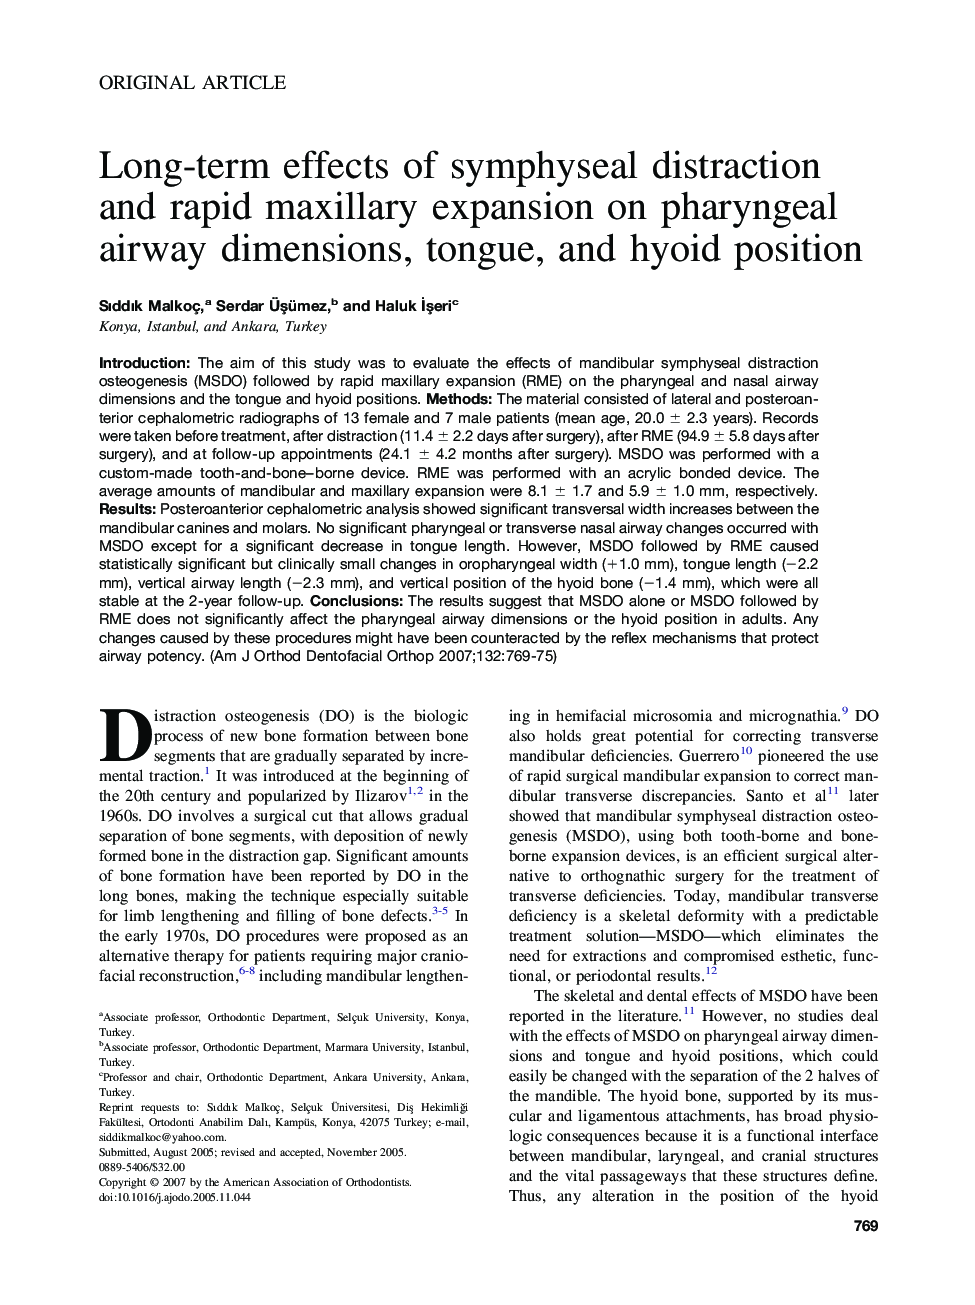 Long-term effects of symphyseal distraction and rapid maxillary expansion on pharyngeal airway dimensions, tongue, and hyoid position